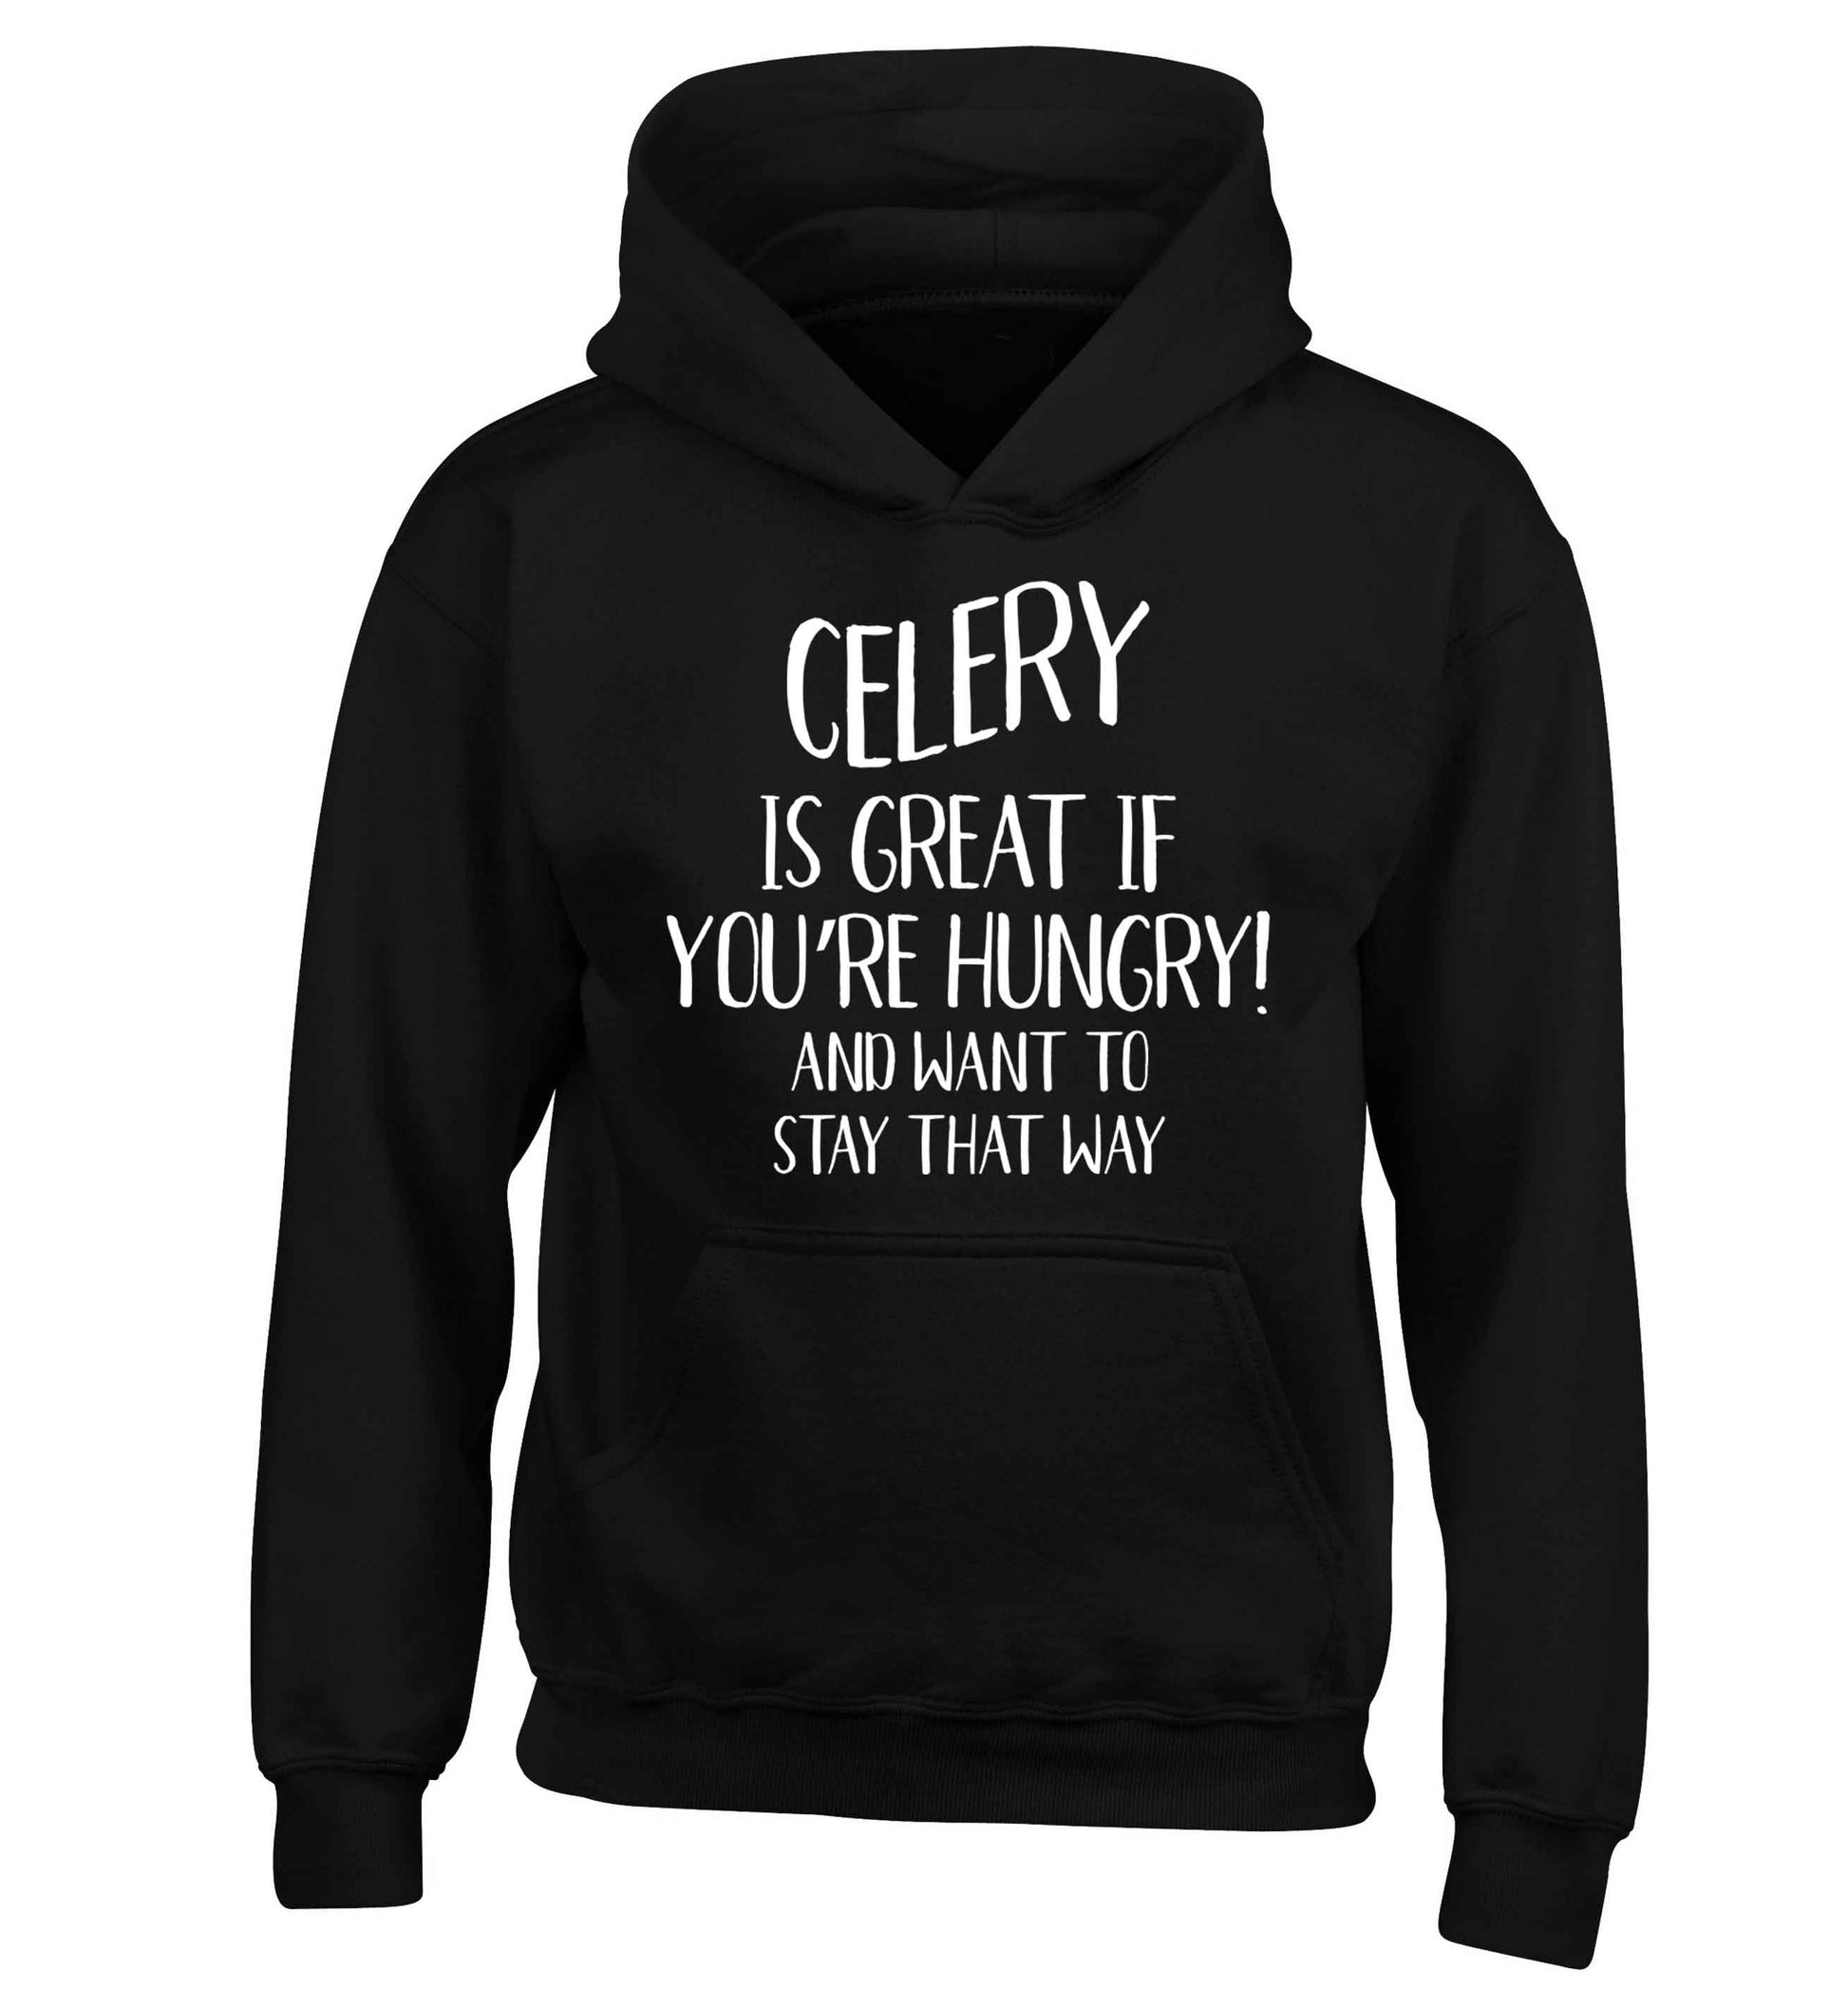 Cellery is great when you're hungry and want to stay that way children's black hoodie 12-13 Years